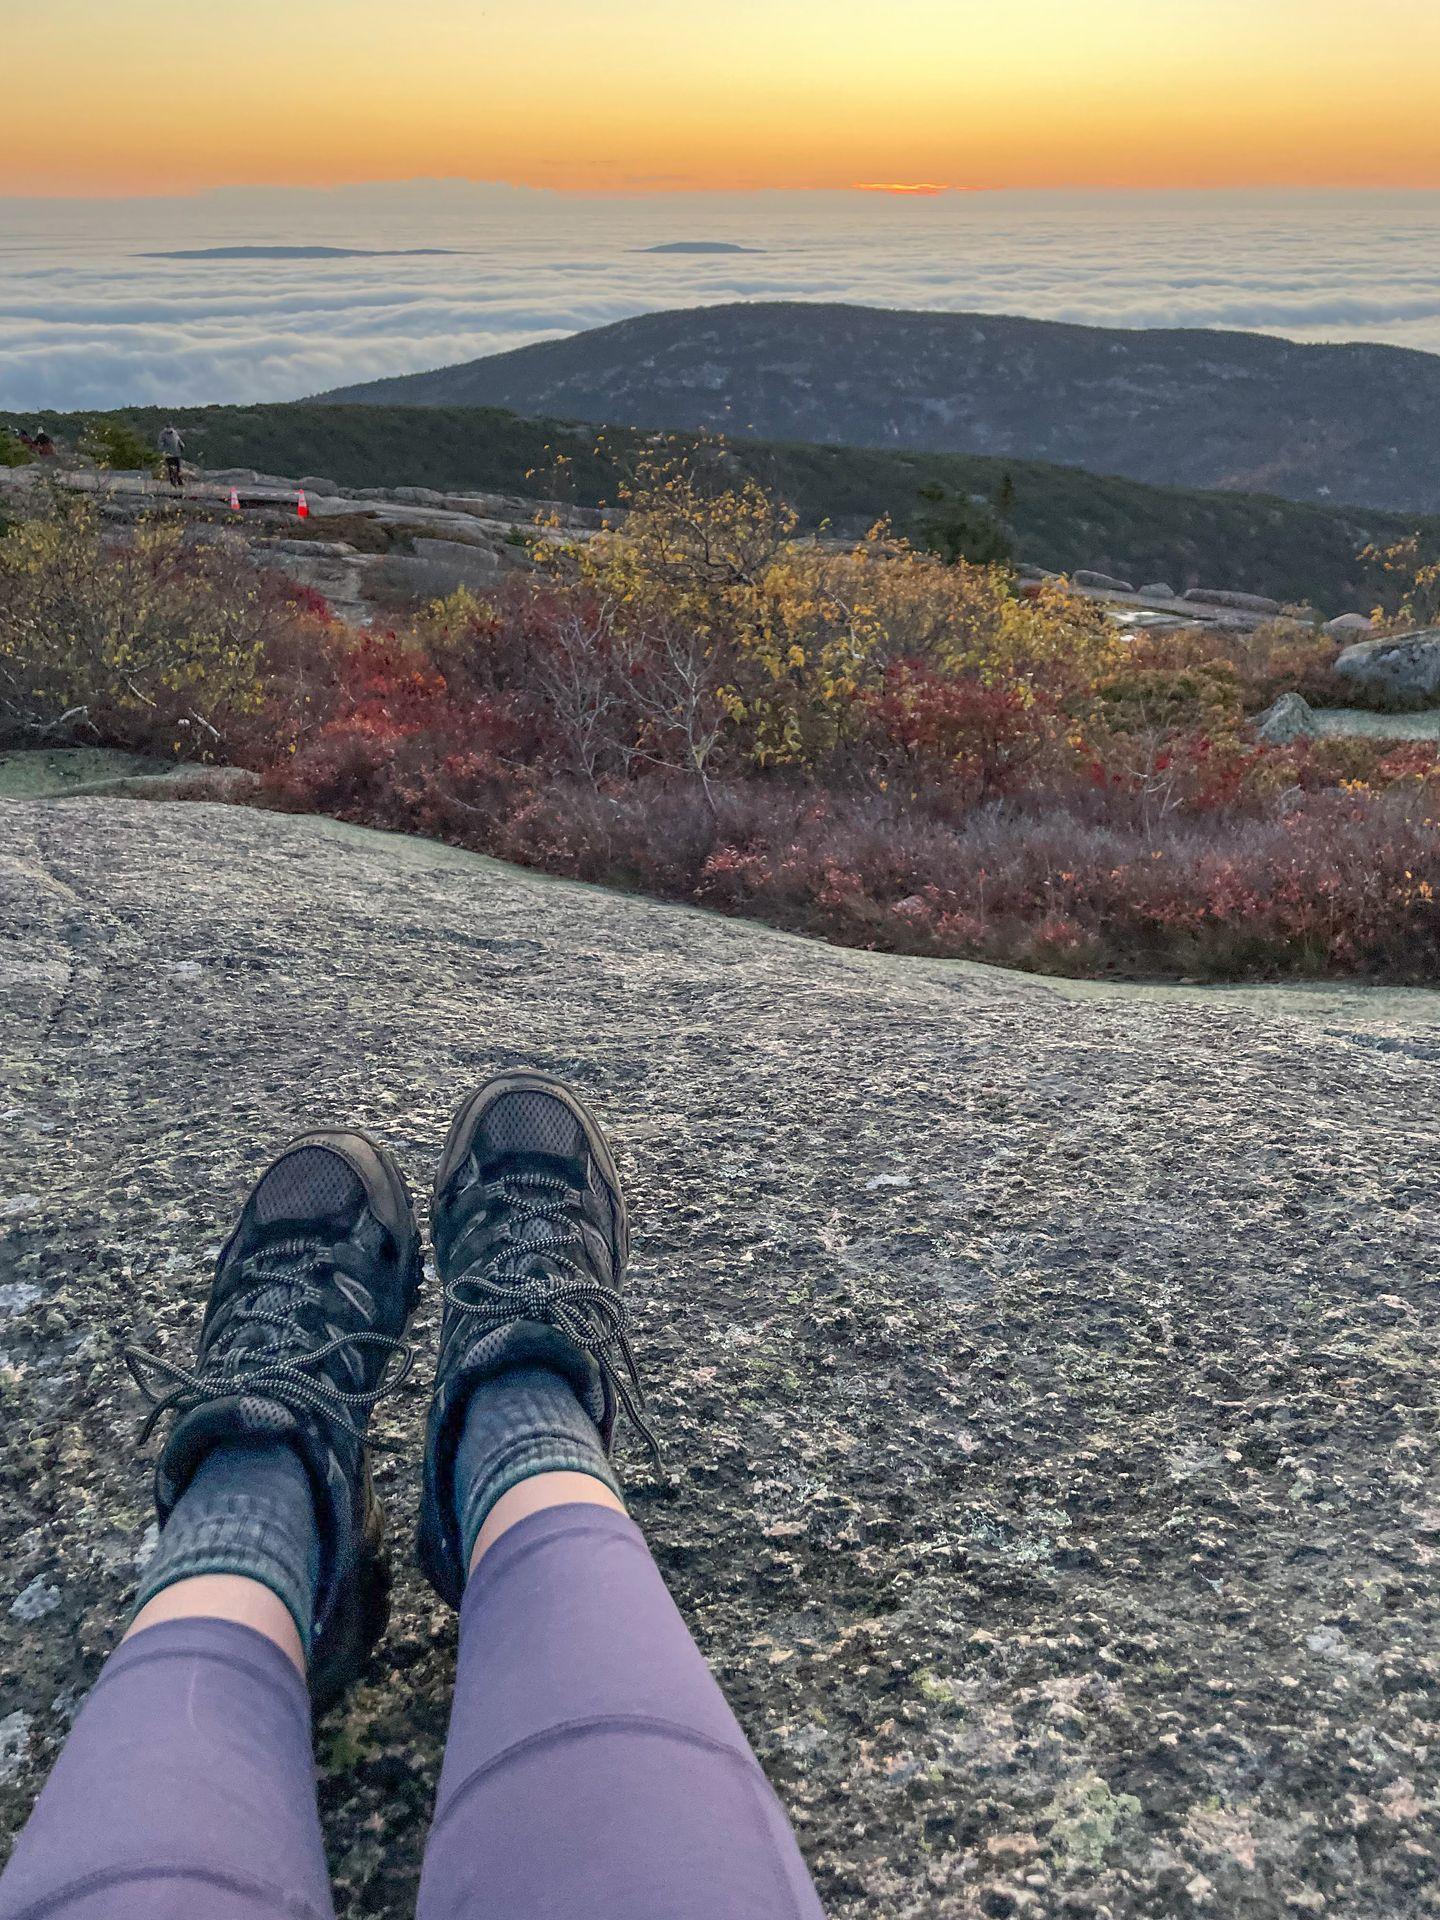 A view of feet while on a hike in Maine.